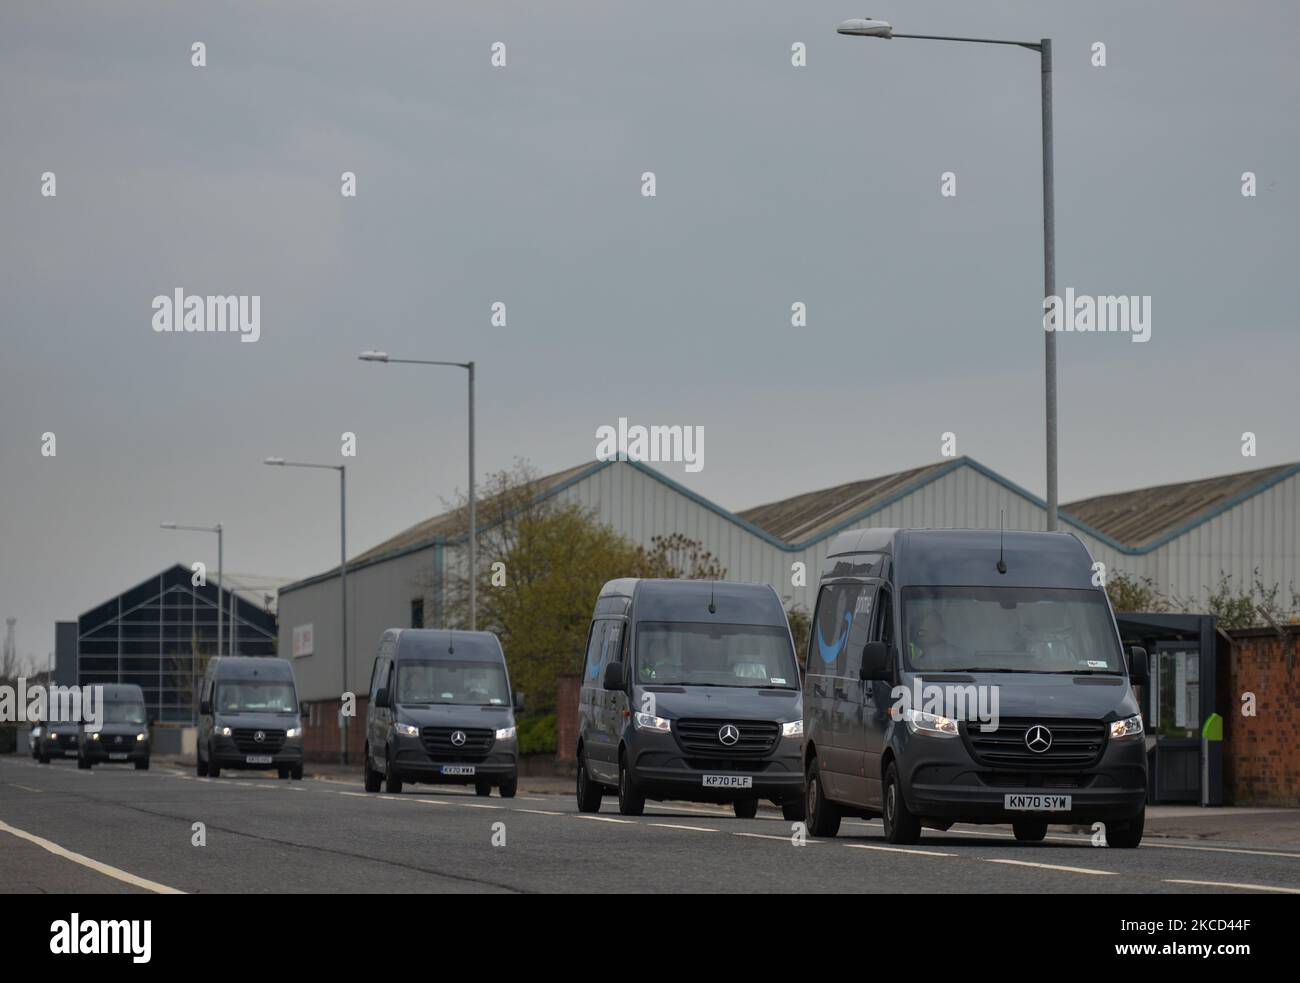 A line of Amazon Prime vans seen in the Titanic Quarter in Belfast. Packages are shipped to the delivery station from Amazon fulfillment and sorting centers and loaded onto vehicles for delivery to Amazon customers in the Belfast area. On Tuesday, April 20, 2021, in Belfast, Northern Ireland. (Photo by Artur Widak/NurPhoto) Stock Photo